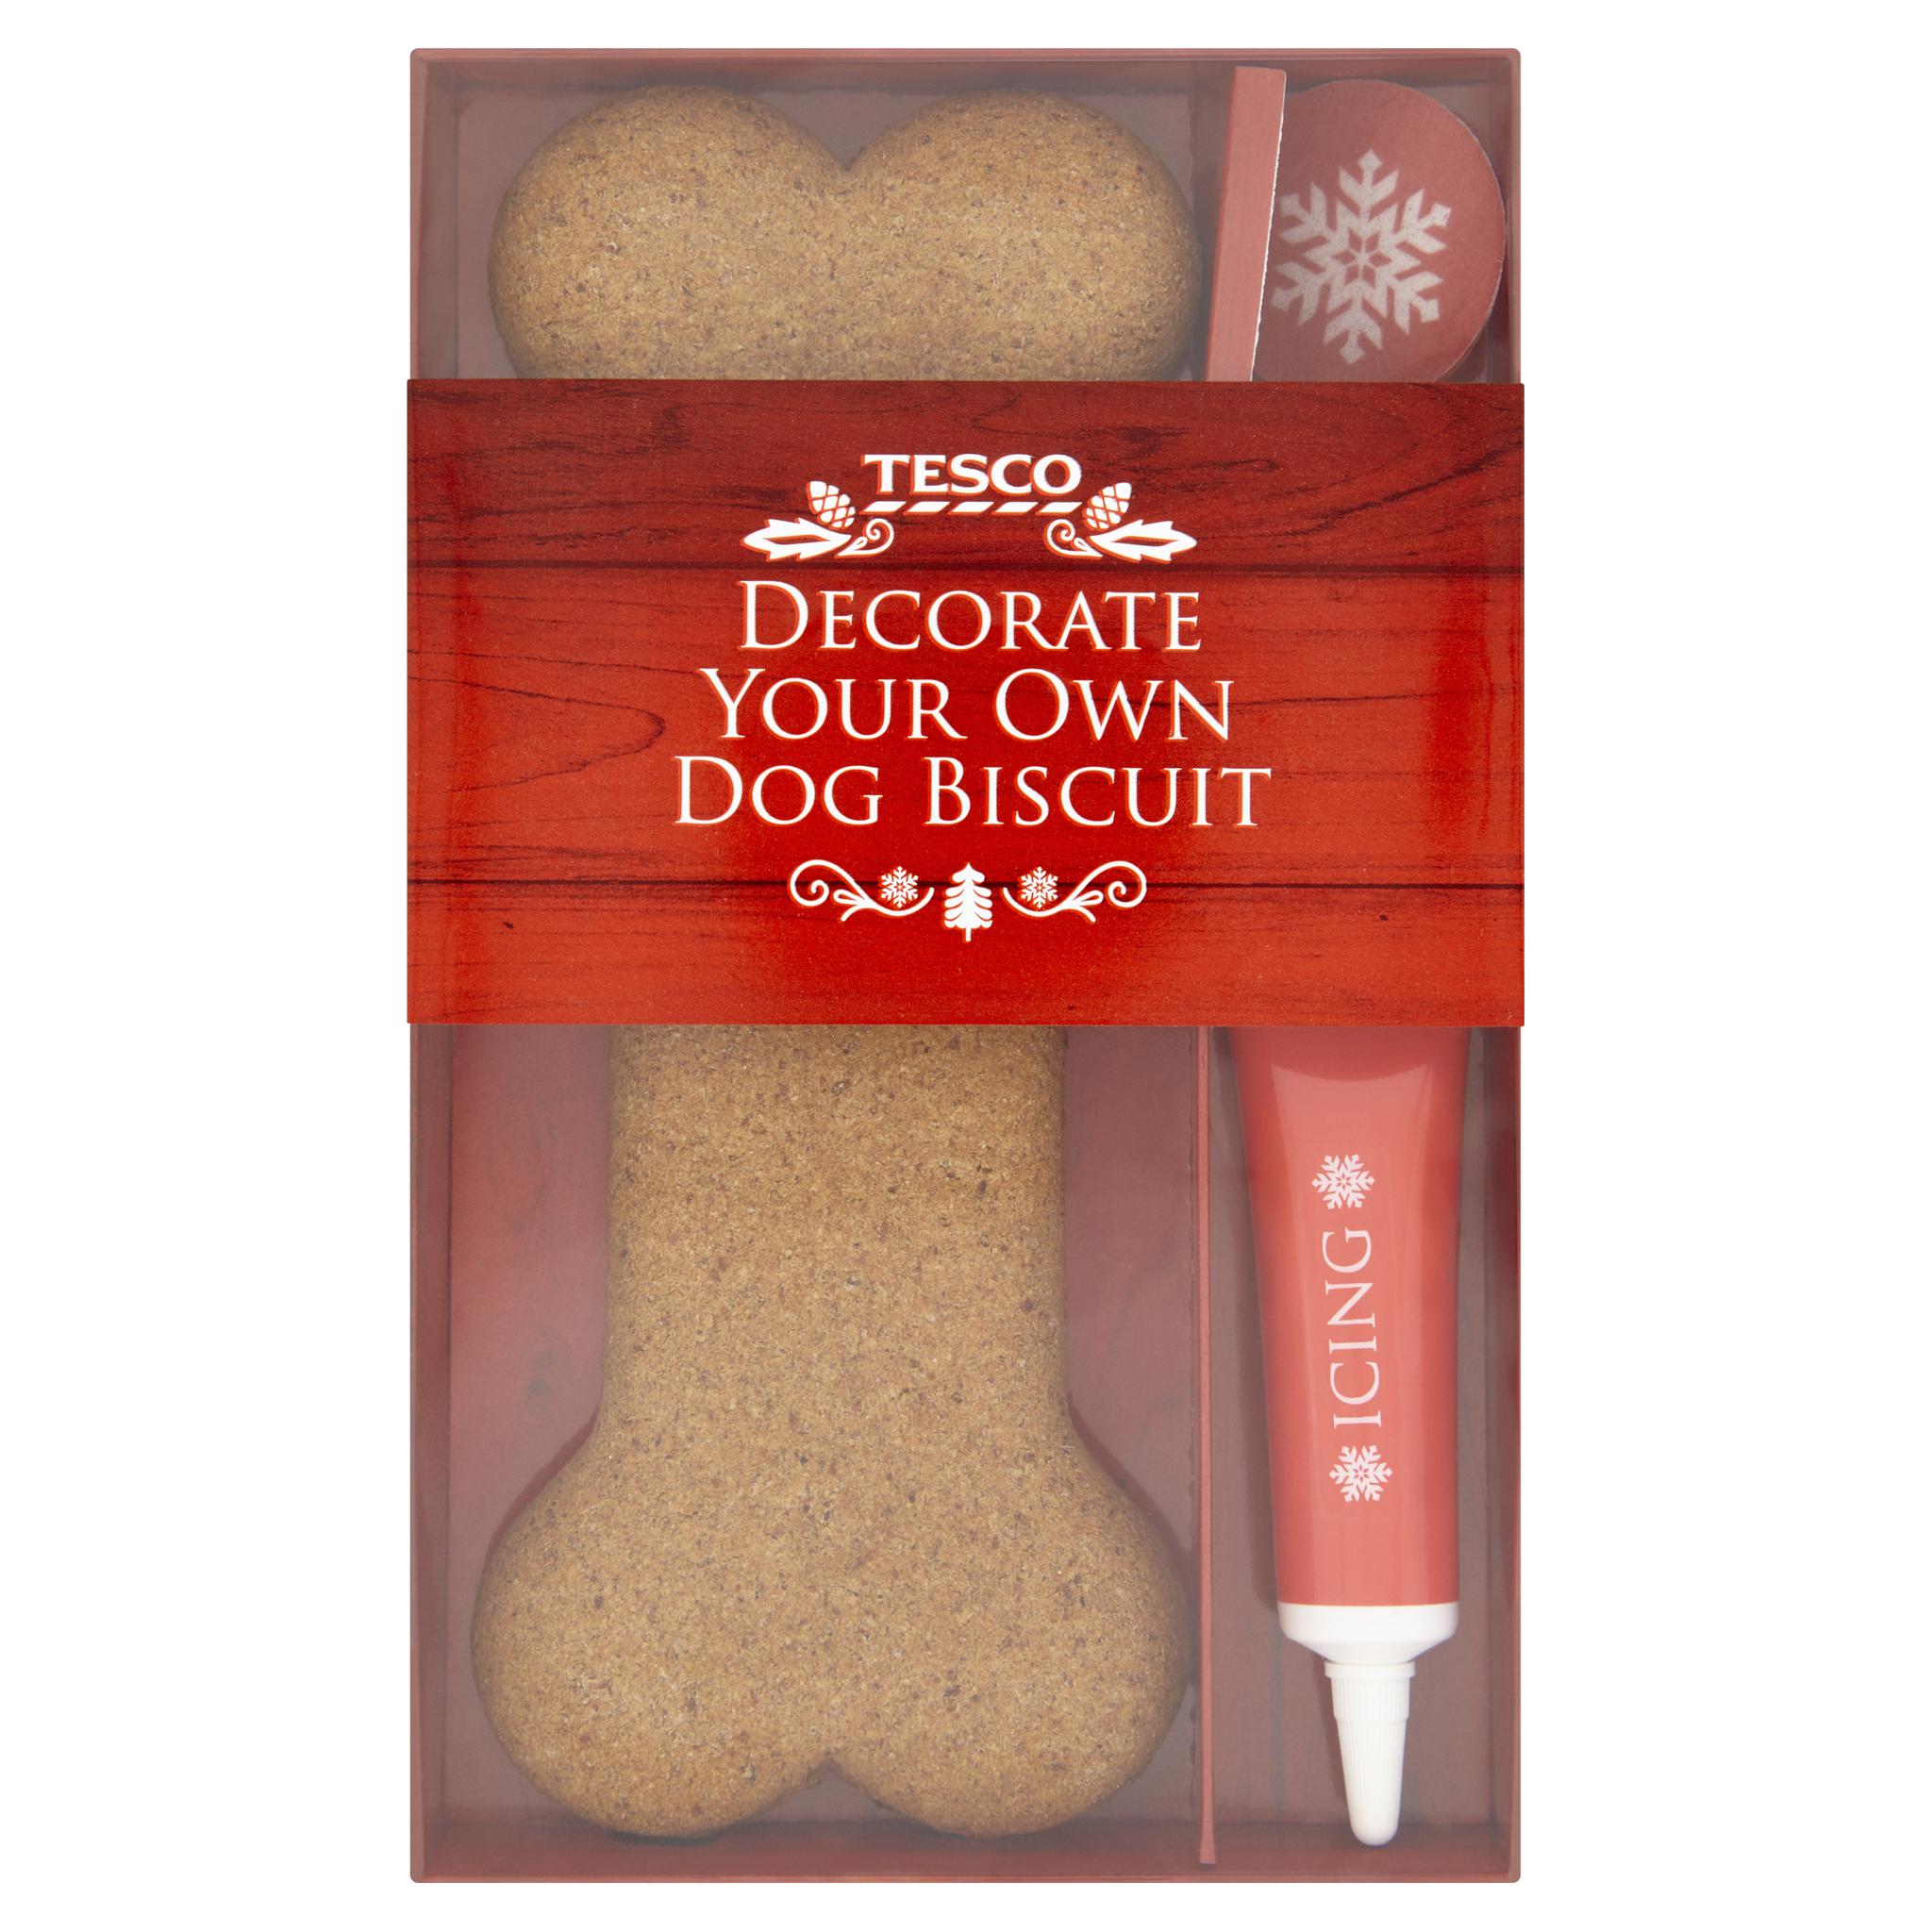 Decorate your own dog biscuit